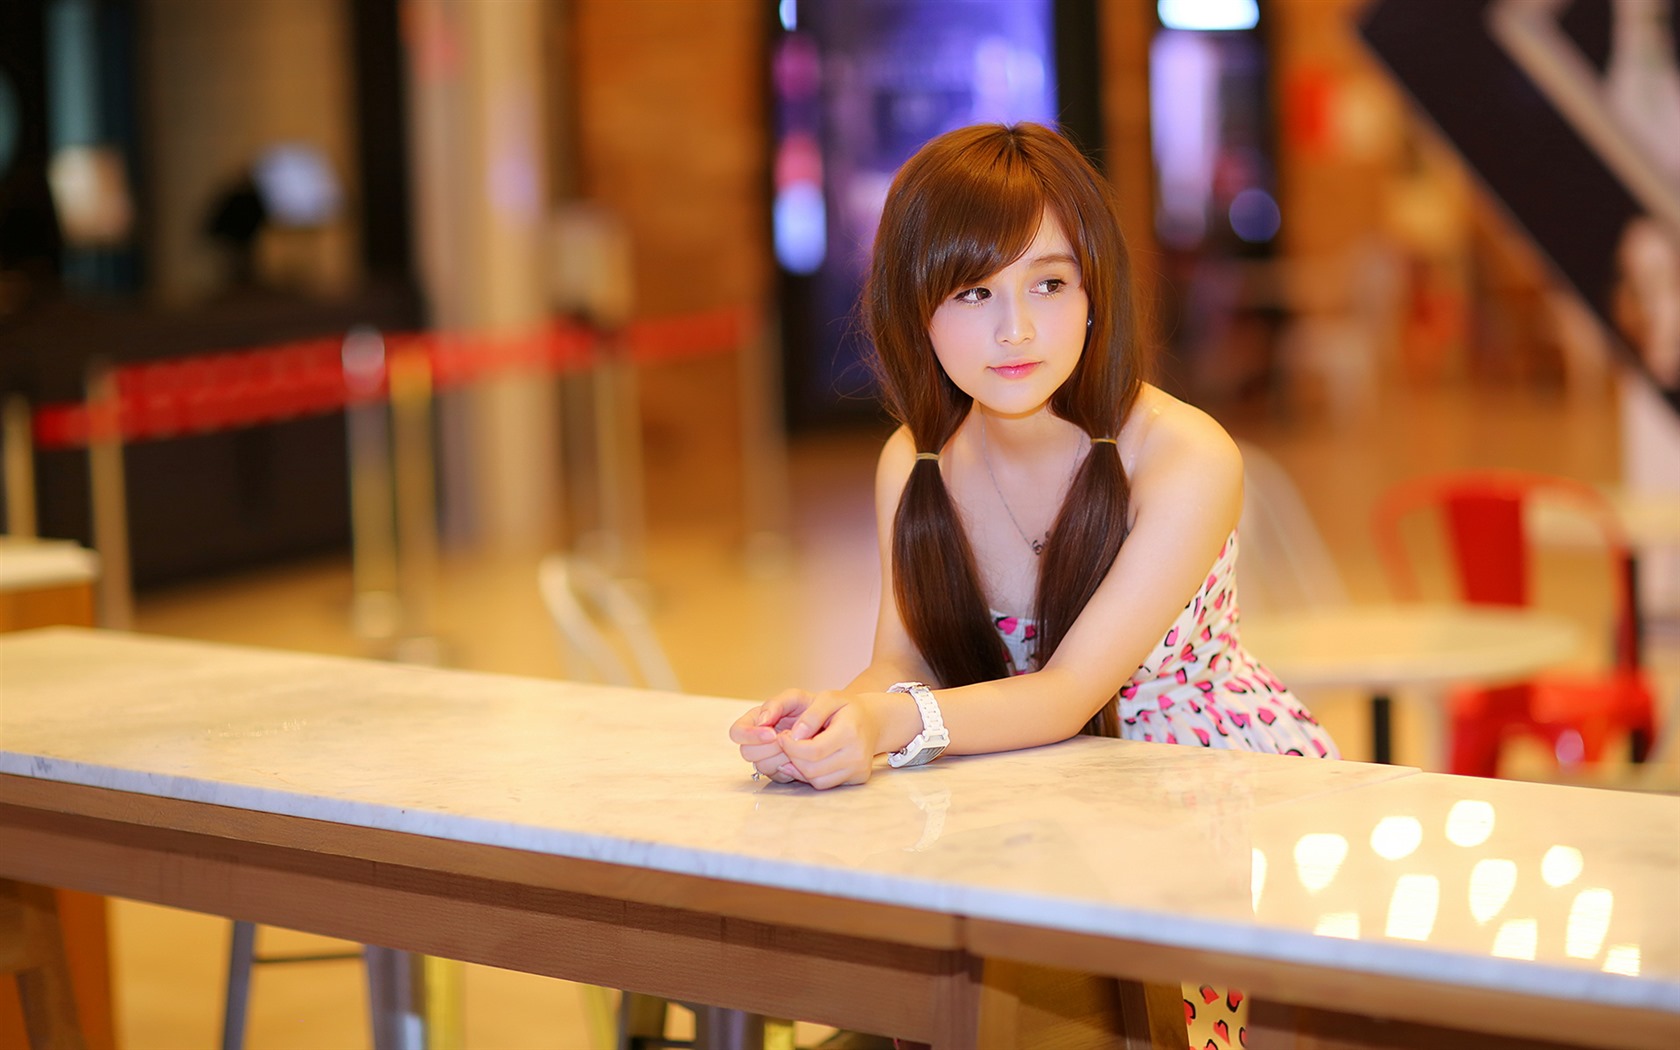 Pure and lovely young Asian girl HD wallpapers collection (2) #38 - 1680x1050